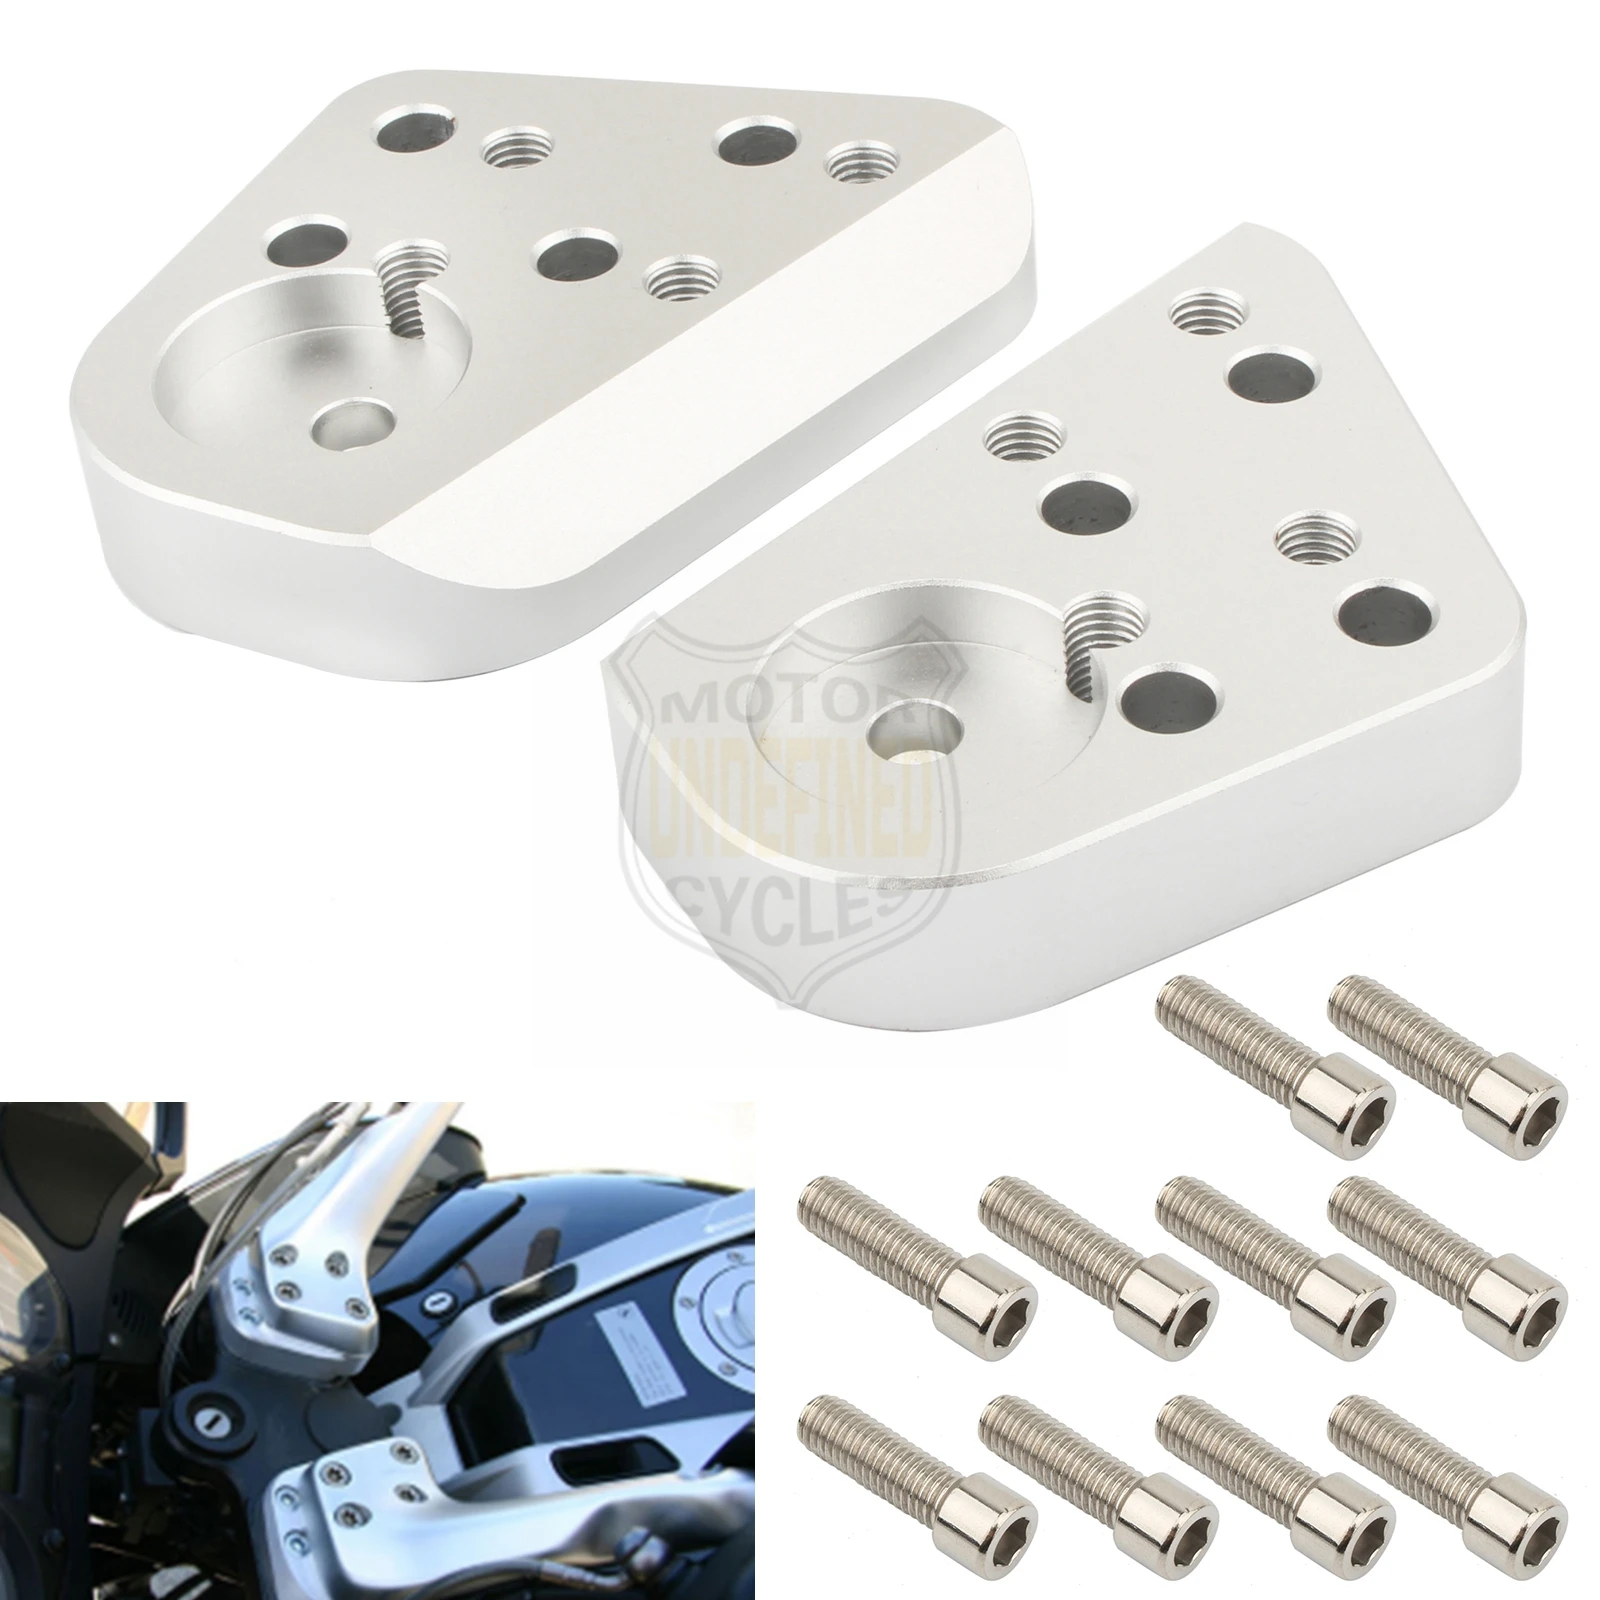 Motorcycle Handlebar Risers Fit for BMW R1100R R1100RT R1150RT R1200RT Handlebar Mounting Riser Clamp Motorcycle Handle Bar Spacers 